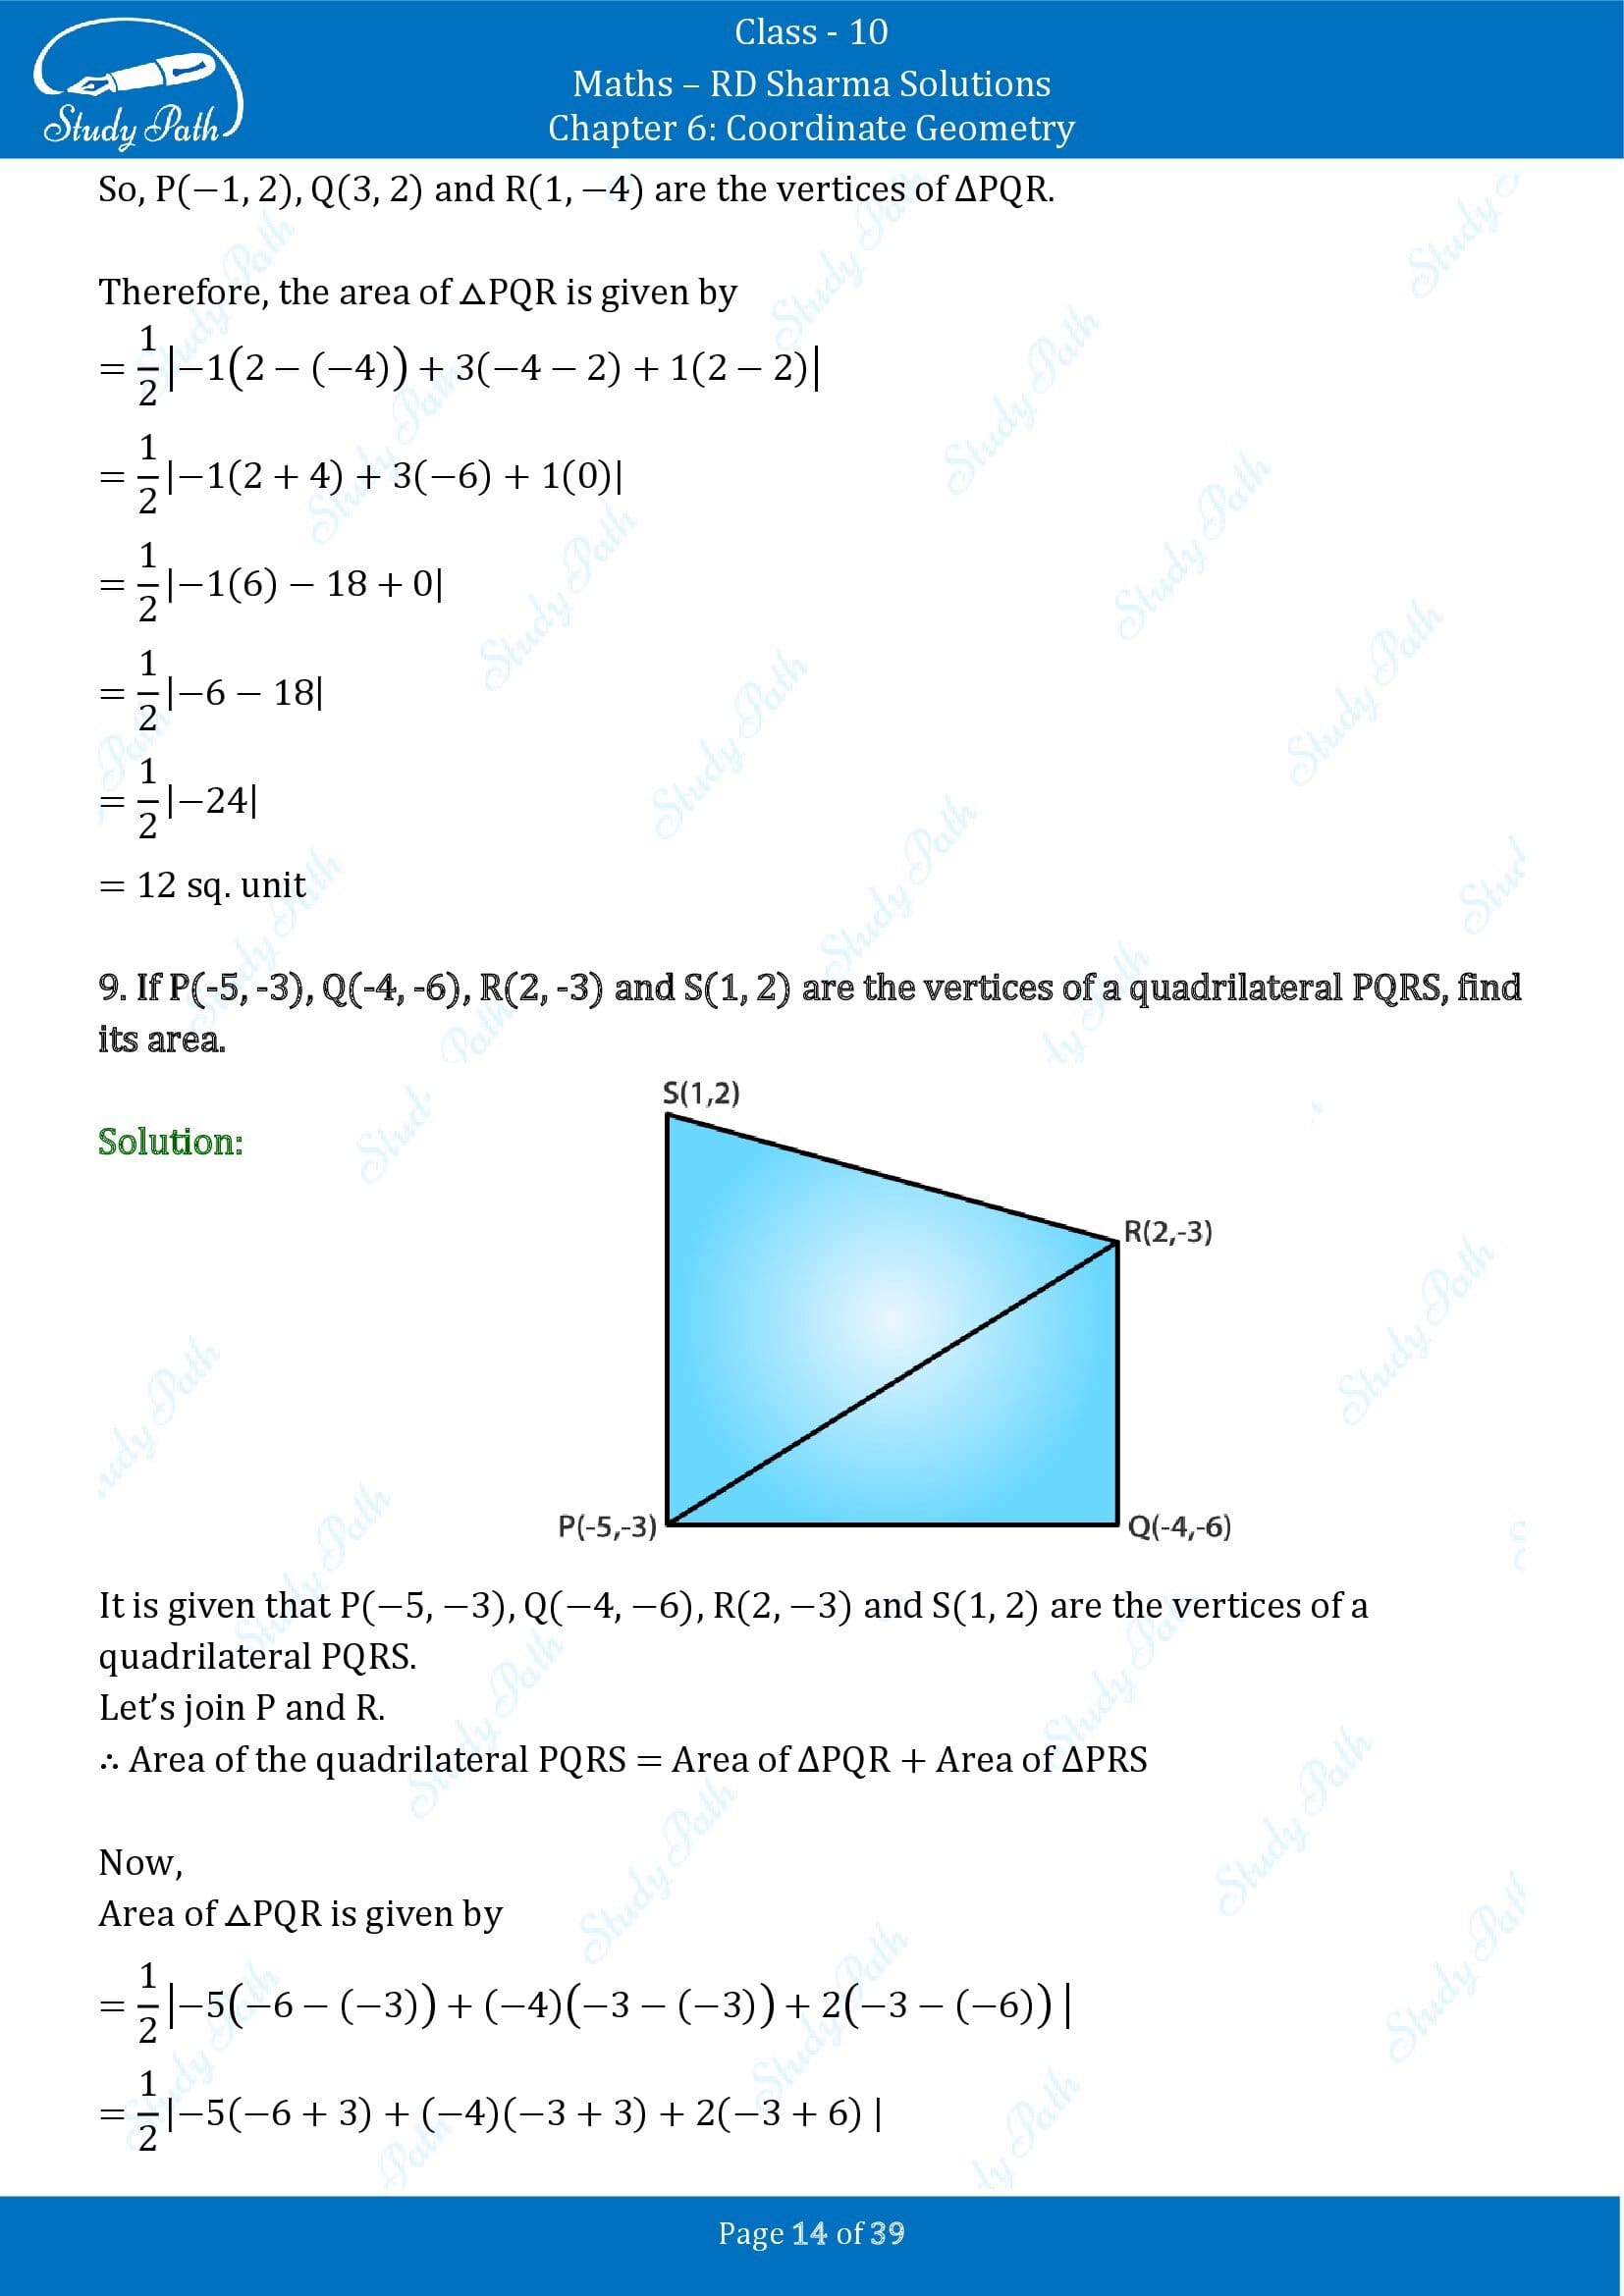 RD Sharma Solutions Class 10 Chapter 6 Coordinate Geometry Exercise 6.5 0014